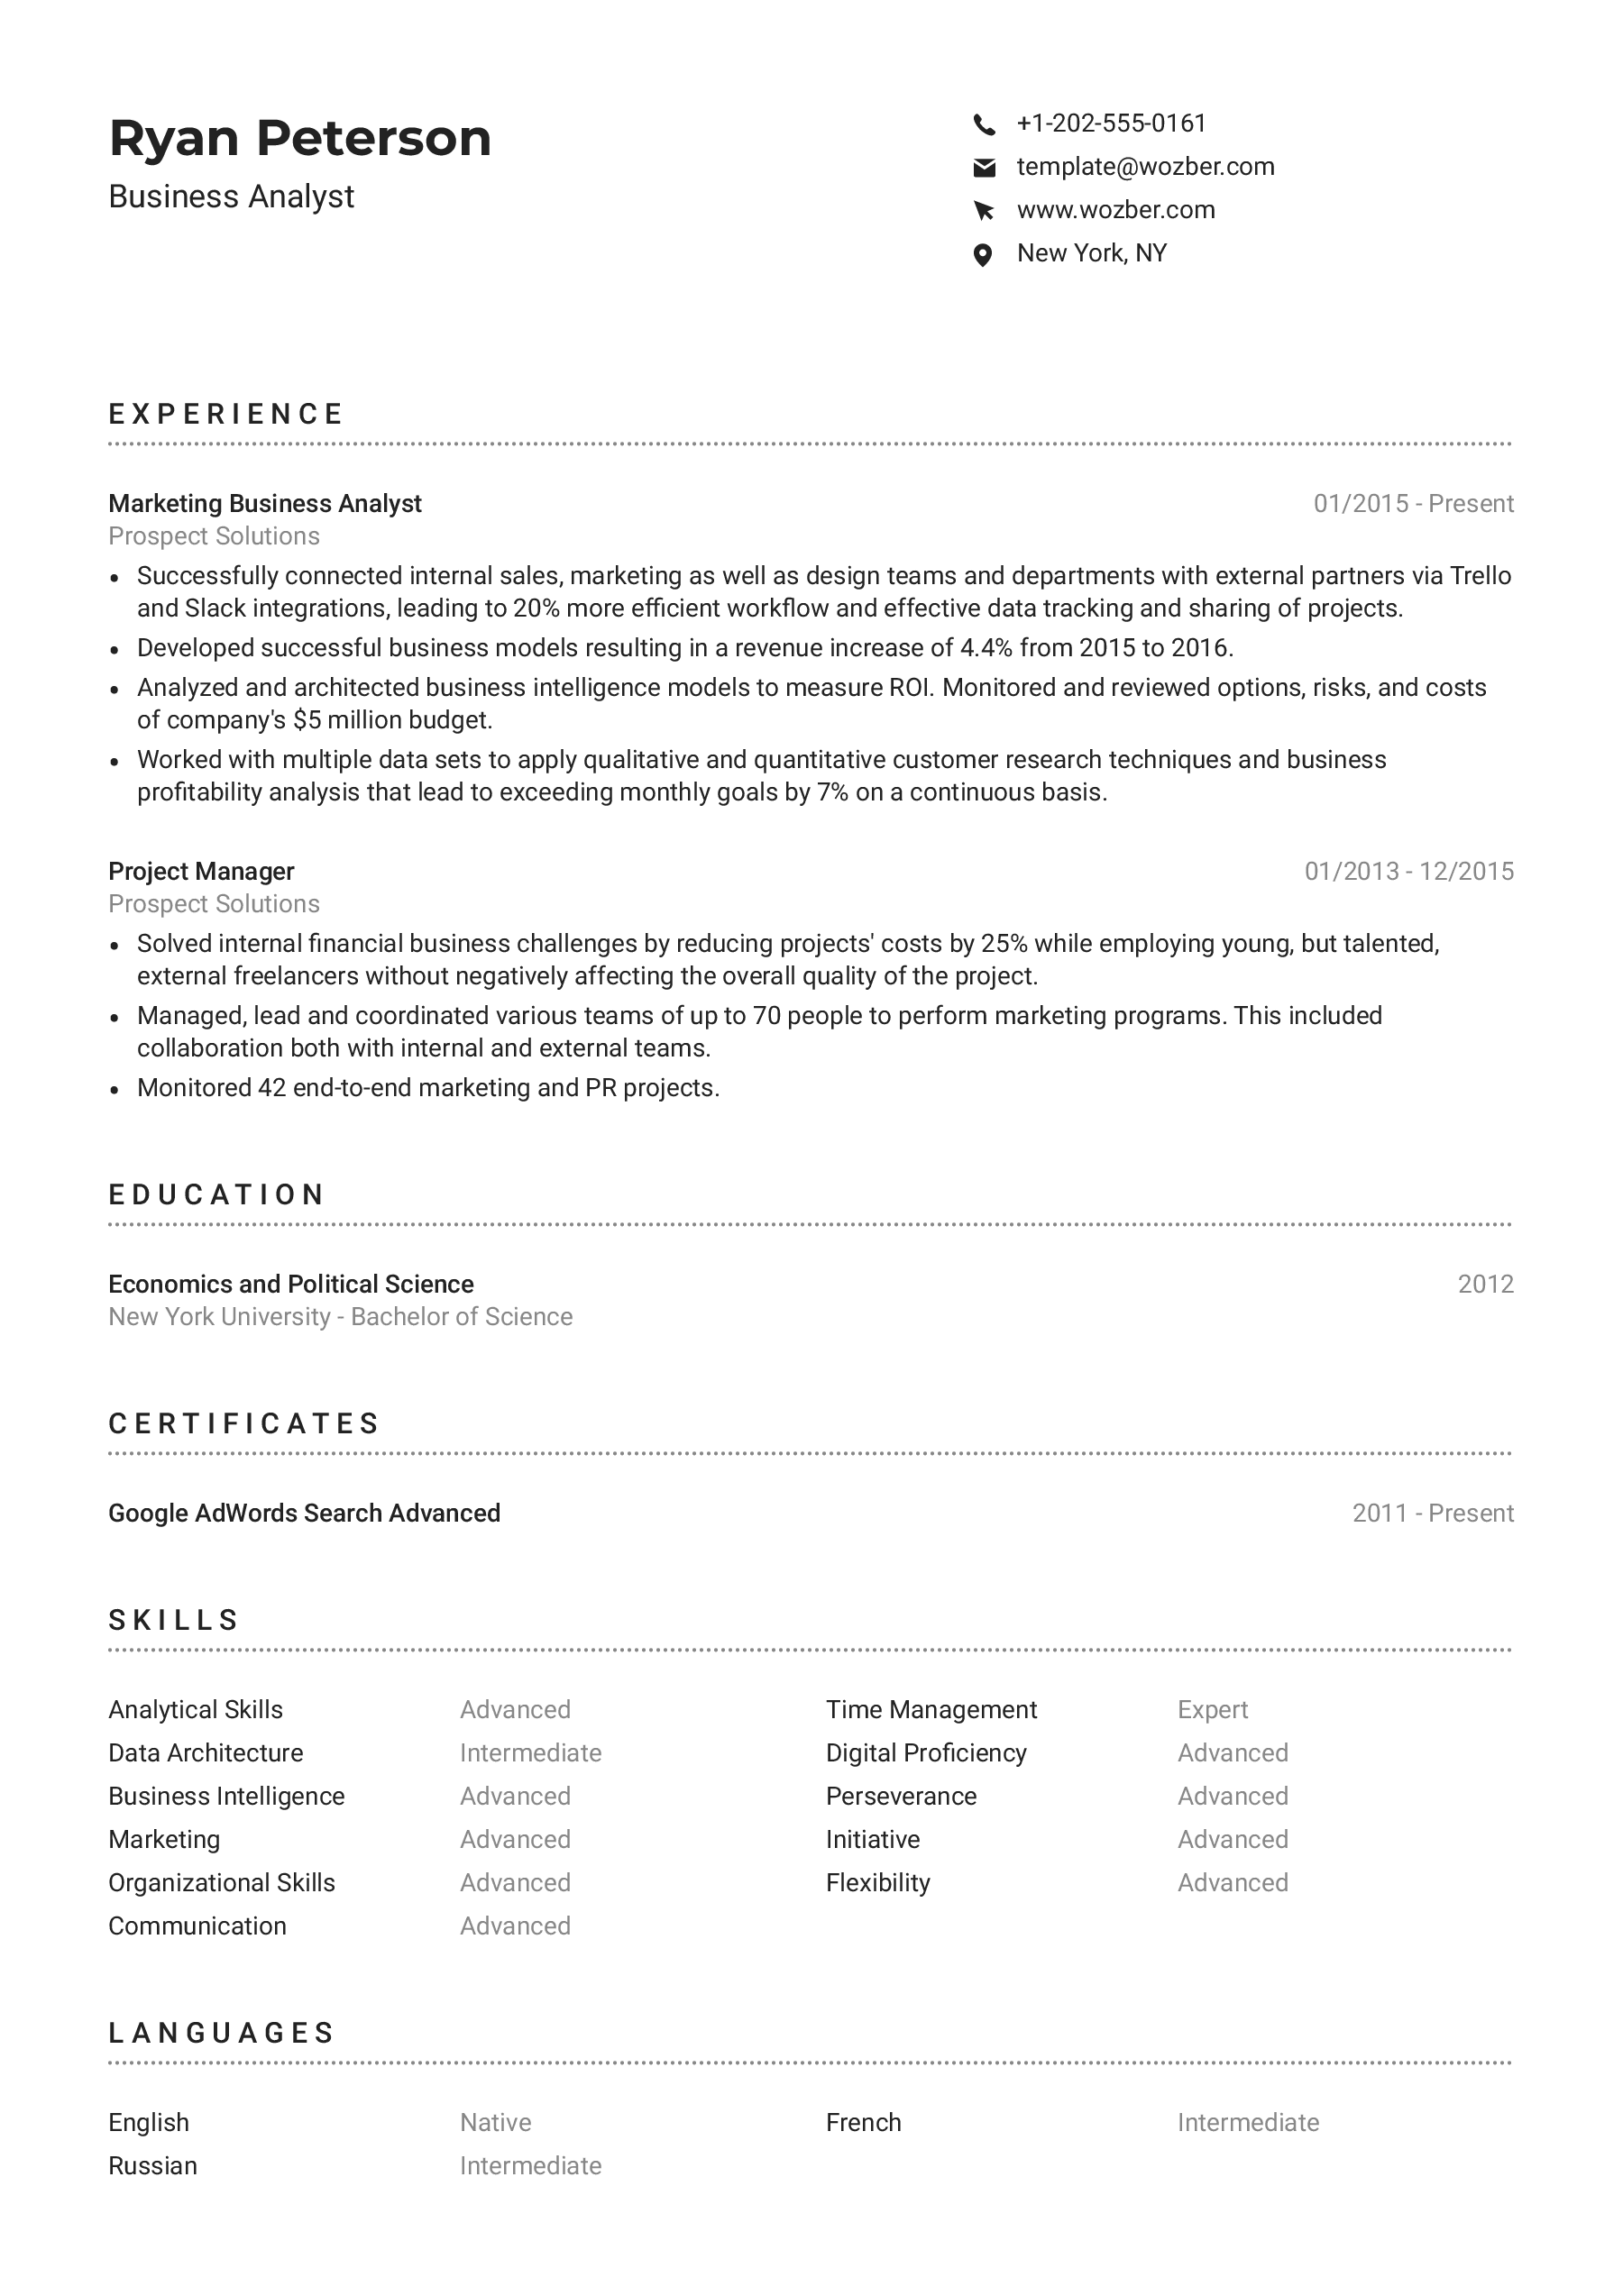 A classic, one-column resume template optimized for applicant tracking systems.